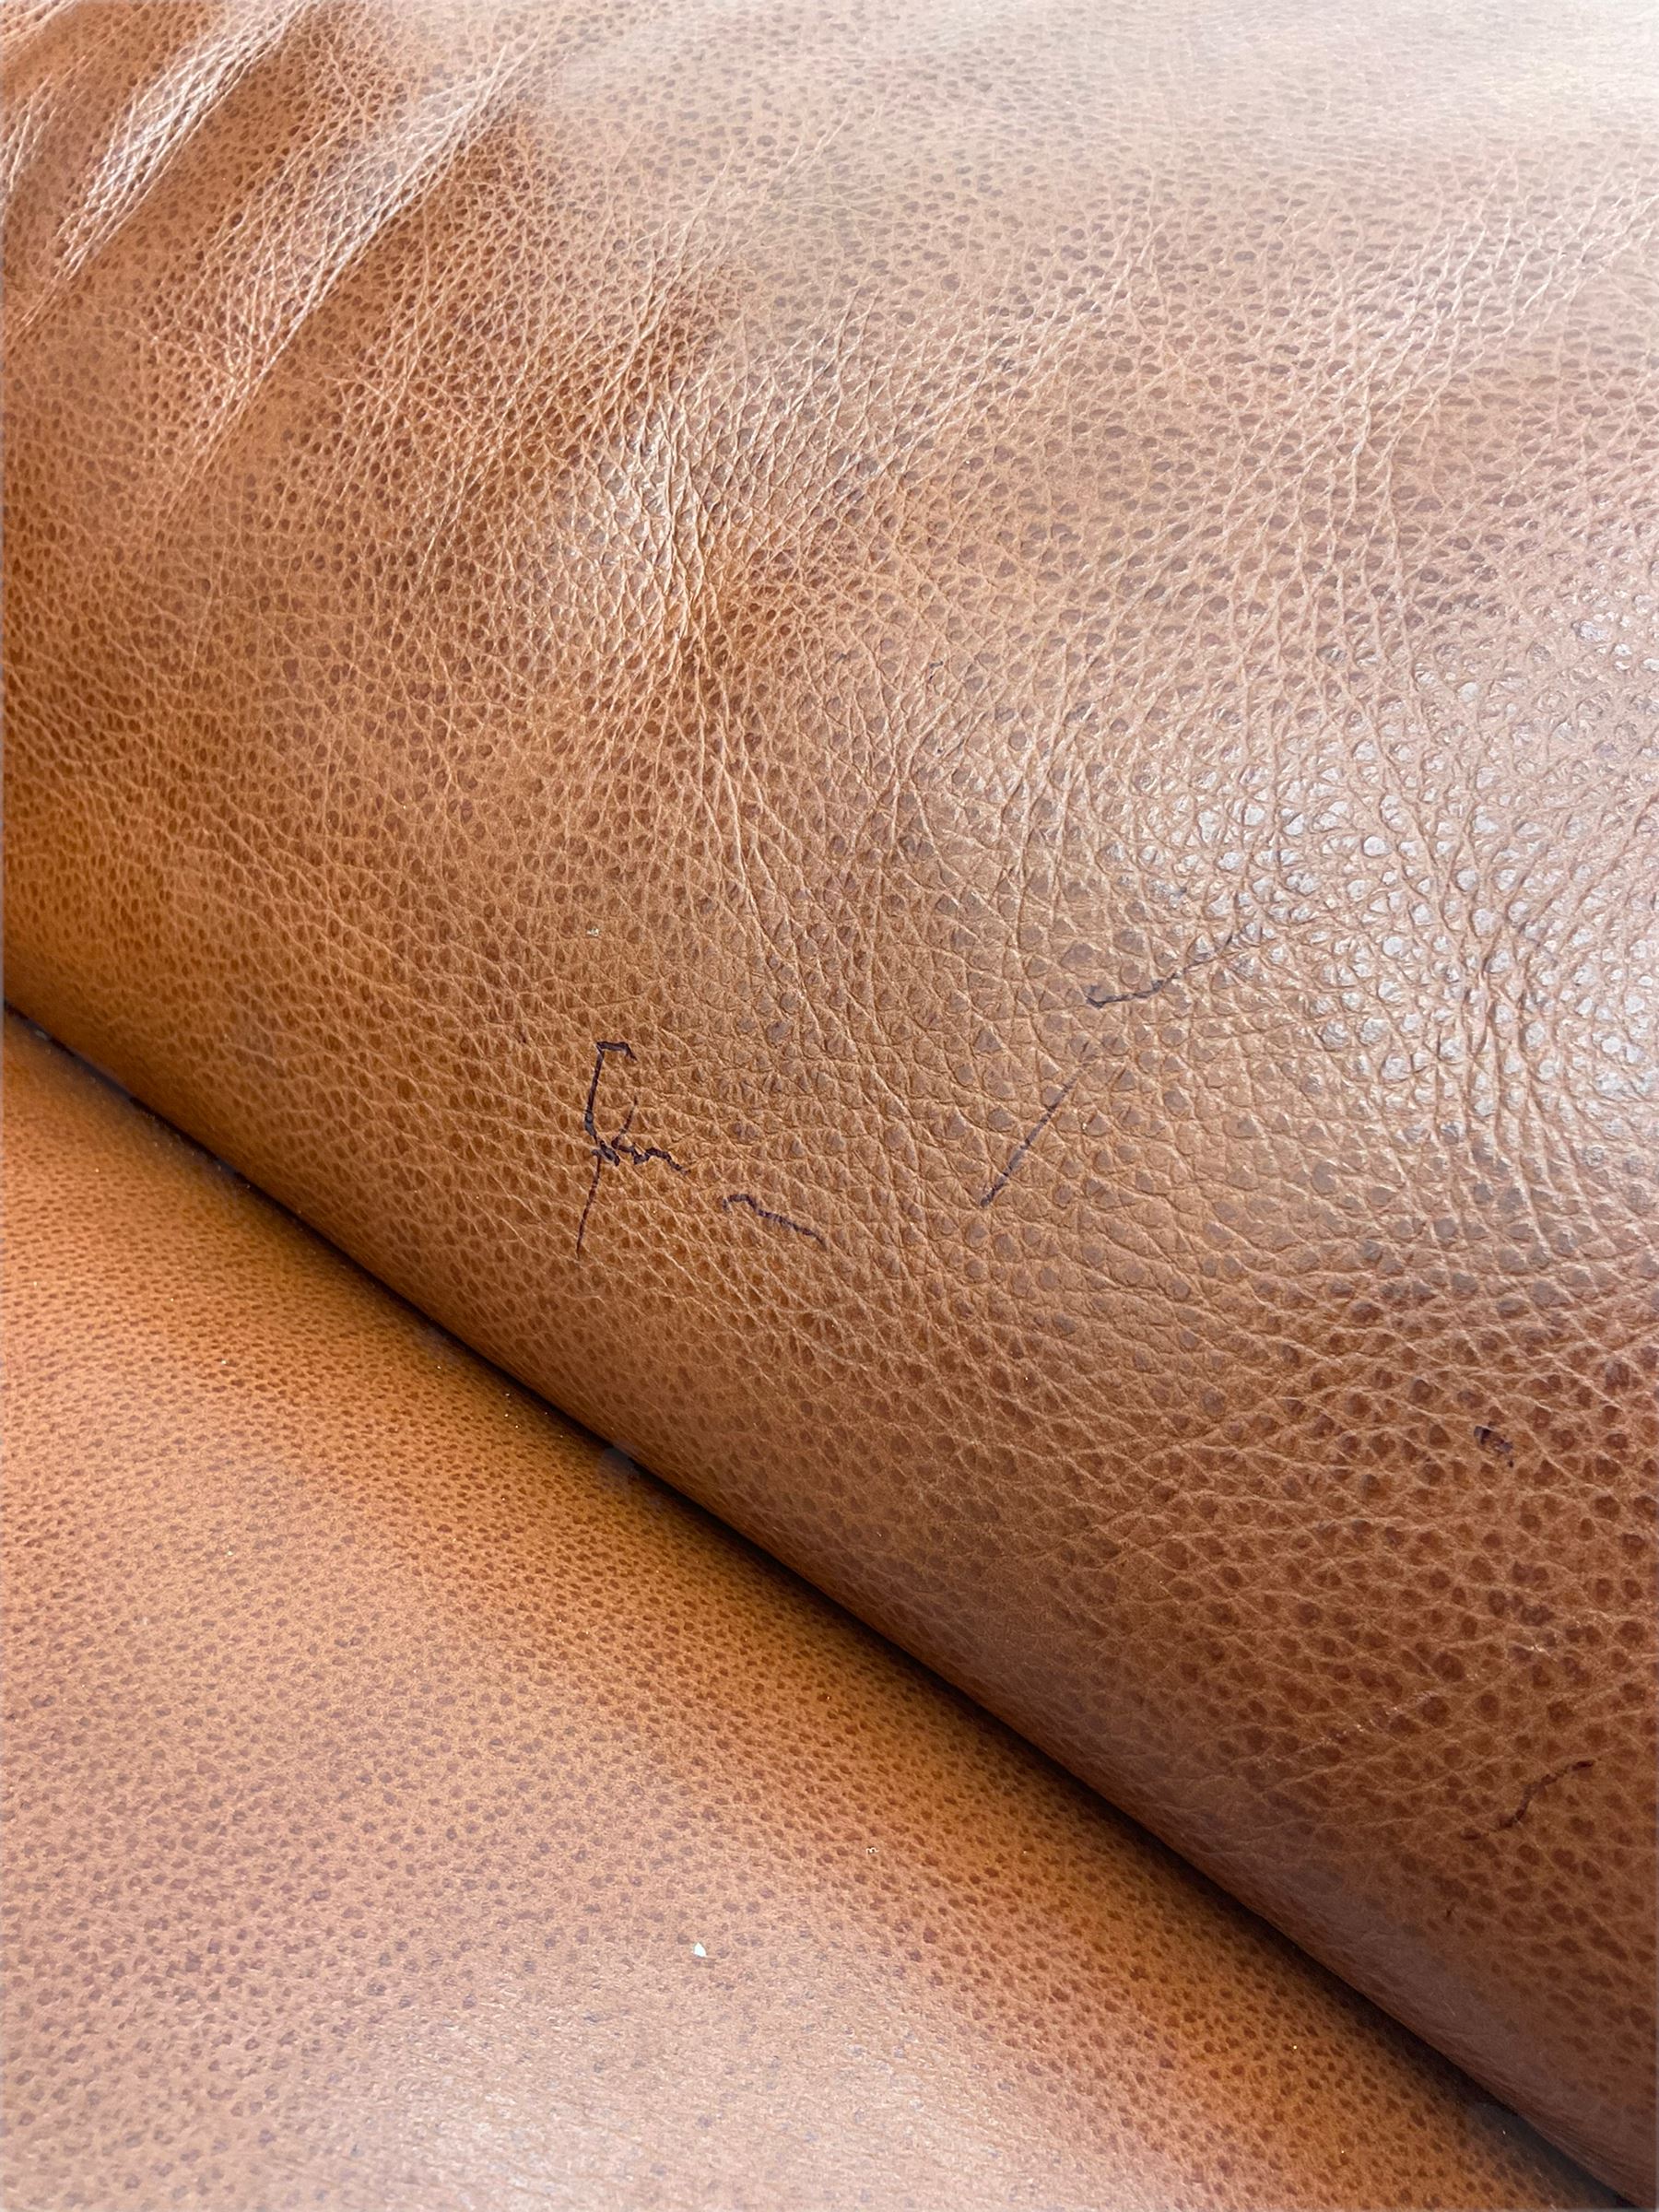 Three electric reclining sofa upholstered in tan leather - Image 18 of 23